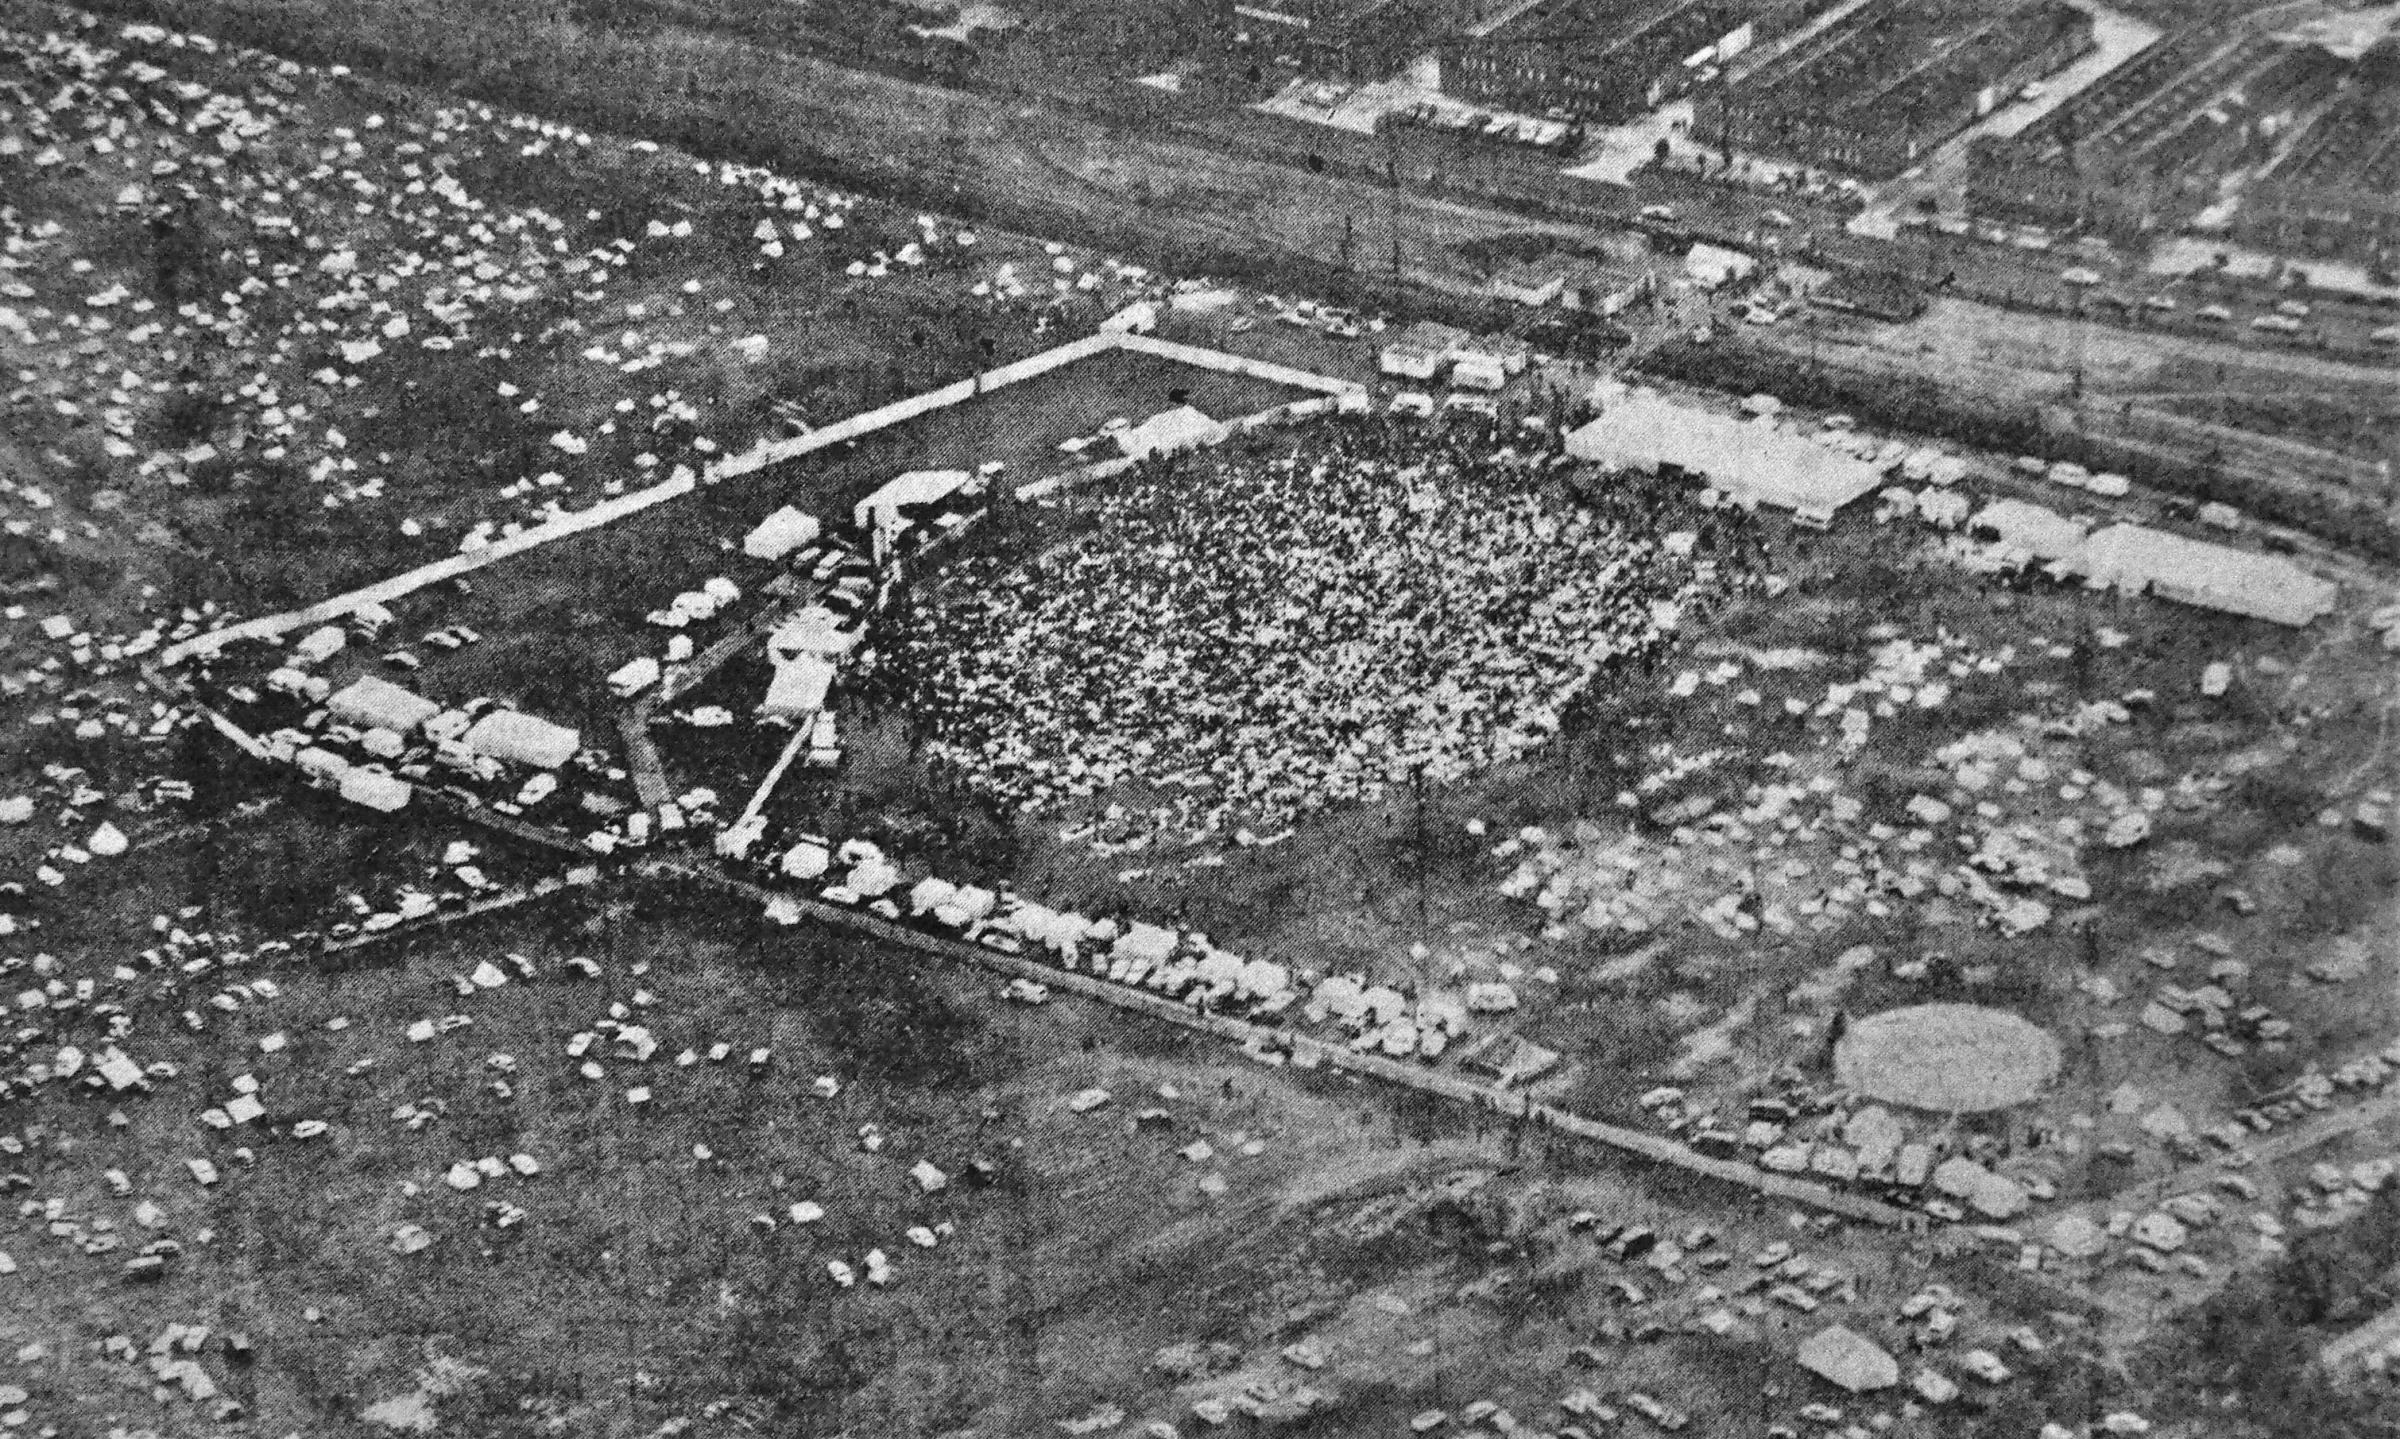 BIRD’S EYE VIEW: The first festival was in 1971